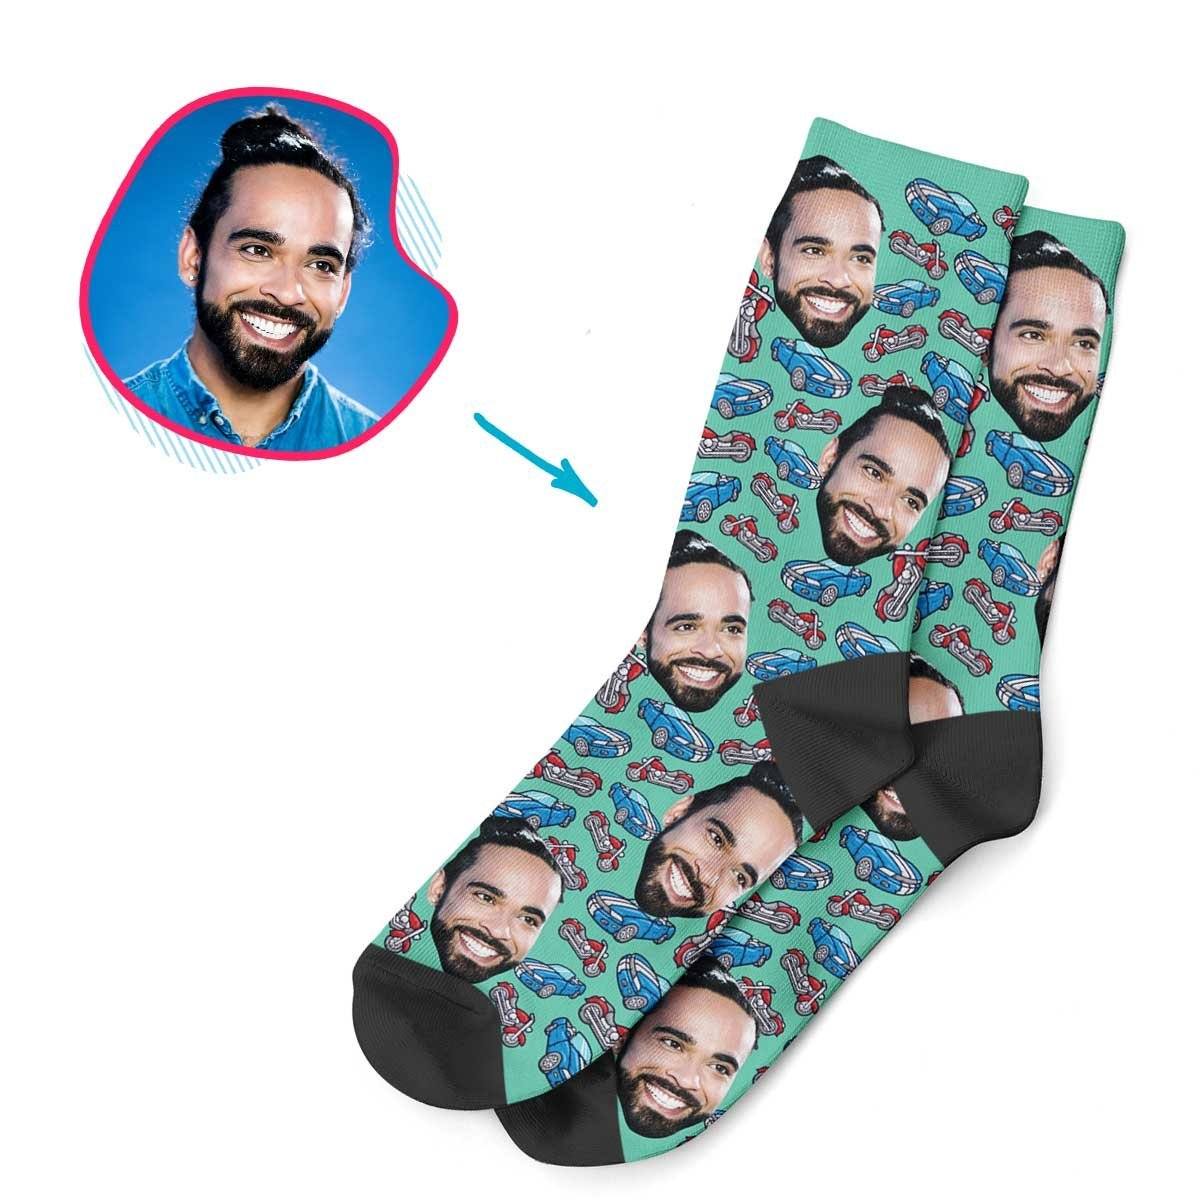 Mint Cars & Motorbikes personalized socks with photo of face printed on them